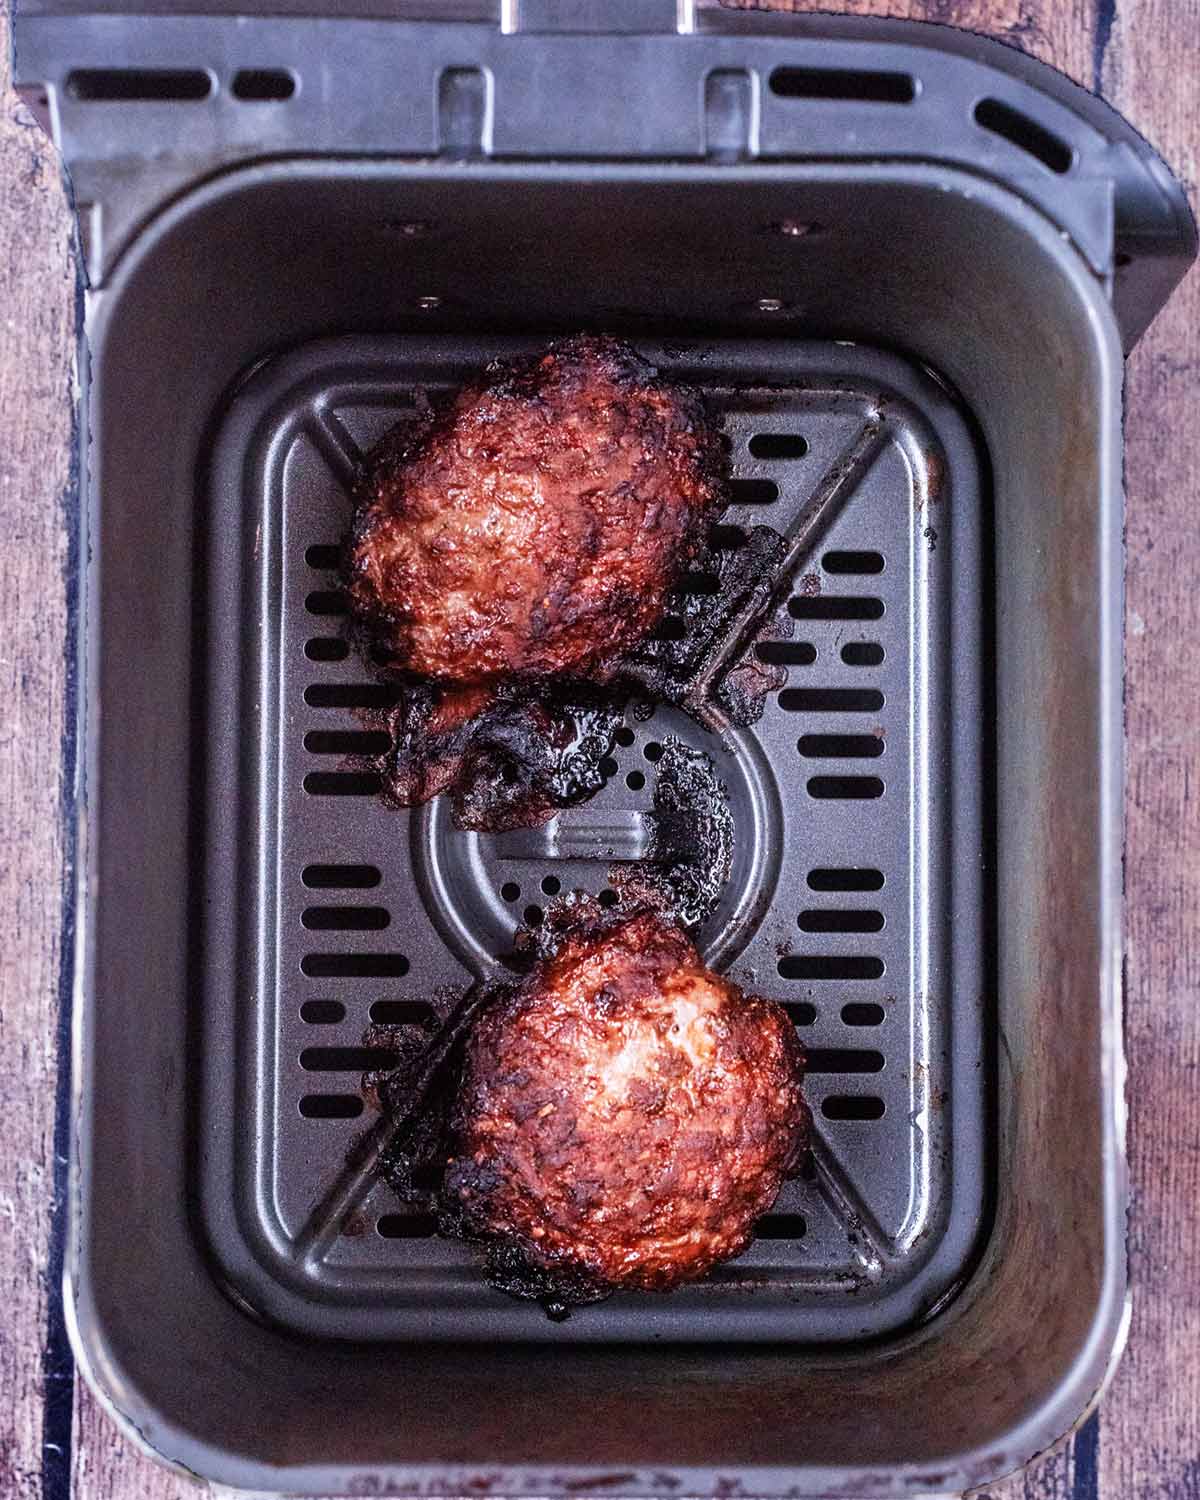 Two cooked burgers in an air fryer.